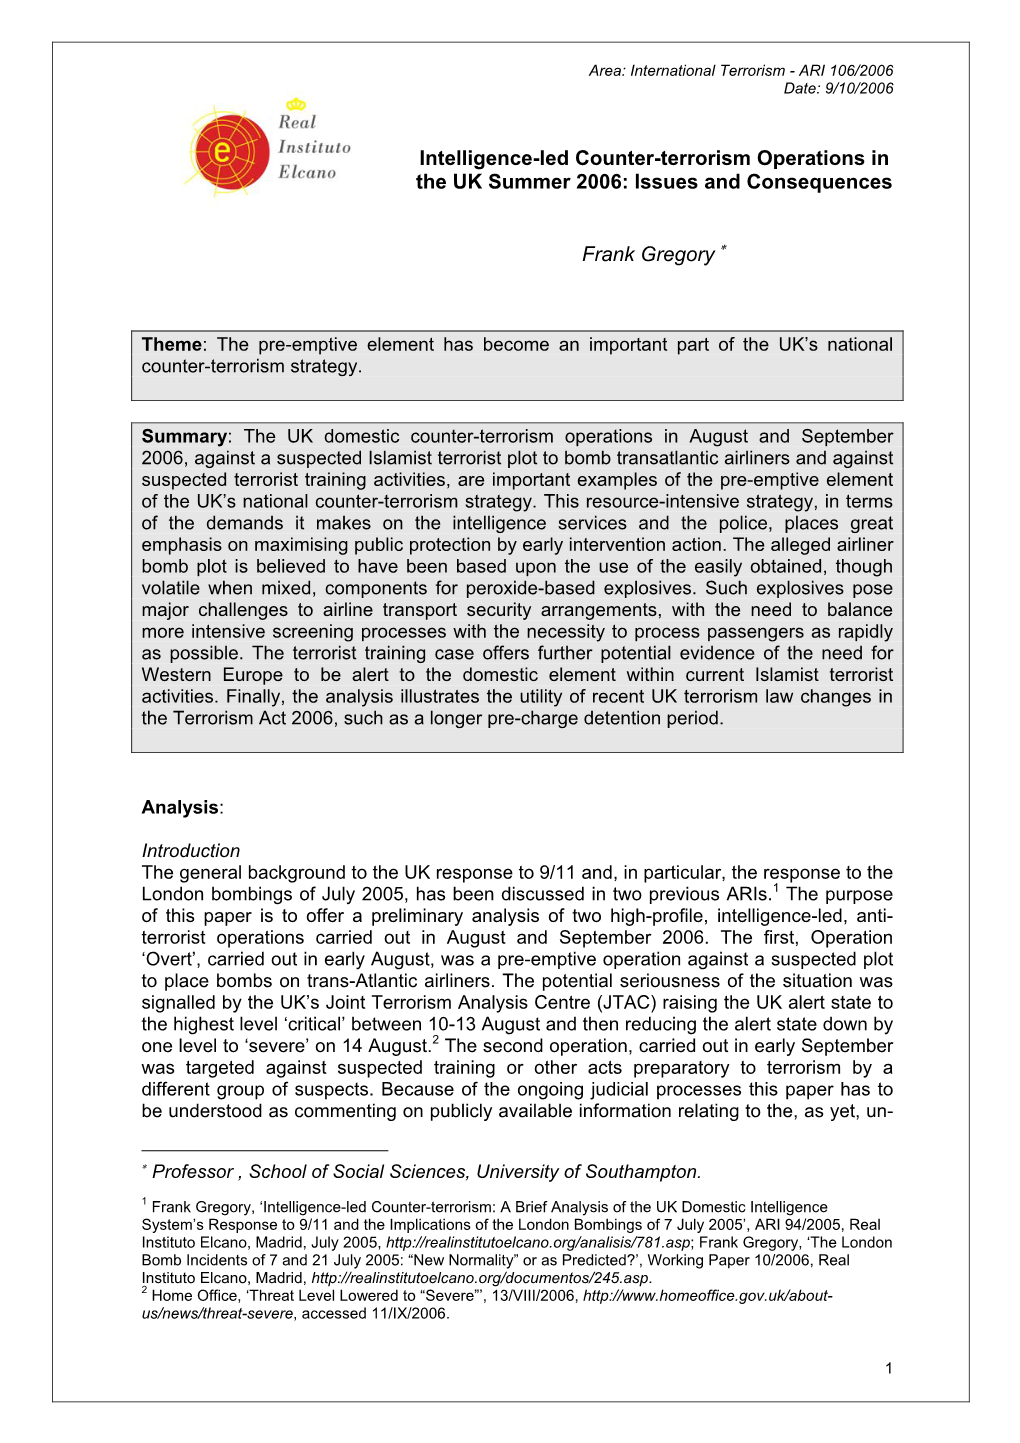 Intelligence-Led Counter-Terrorism Operations in the UK Summer 2006: Issues and Consequences